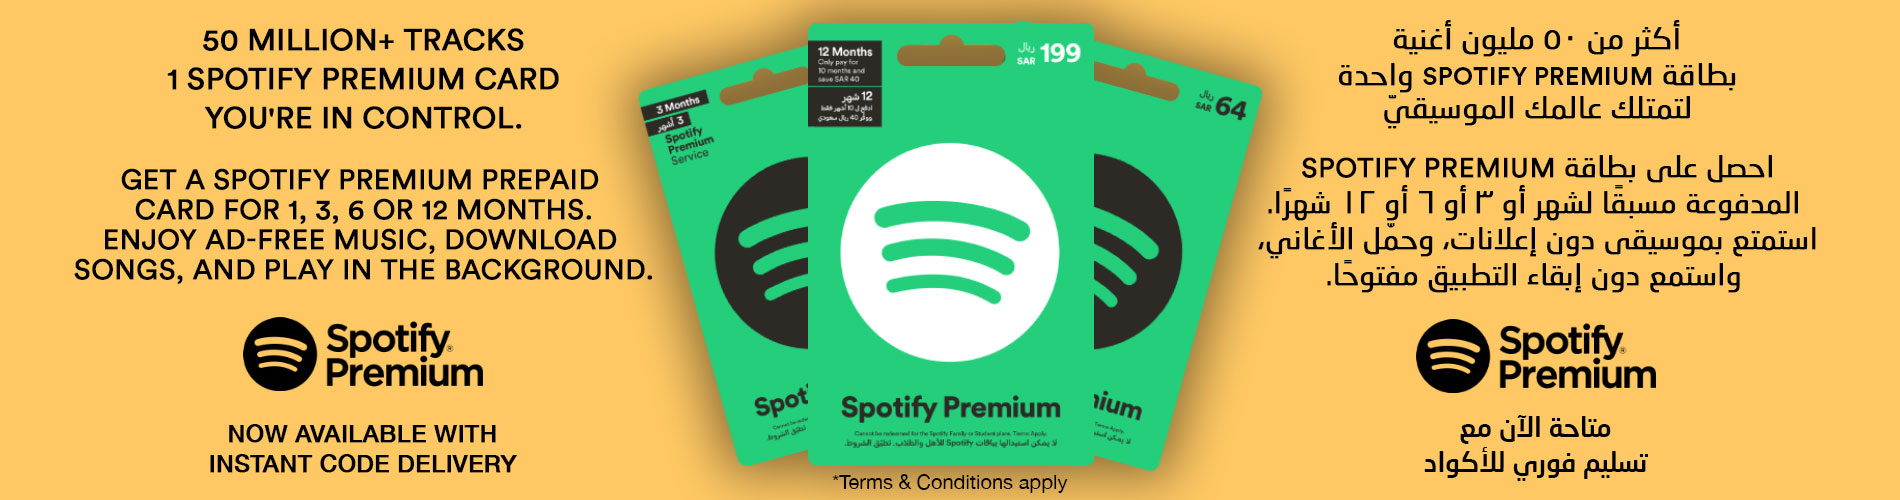 subscription to spotify